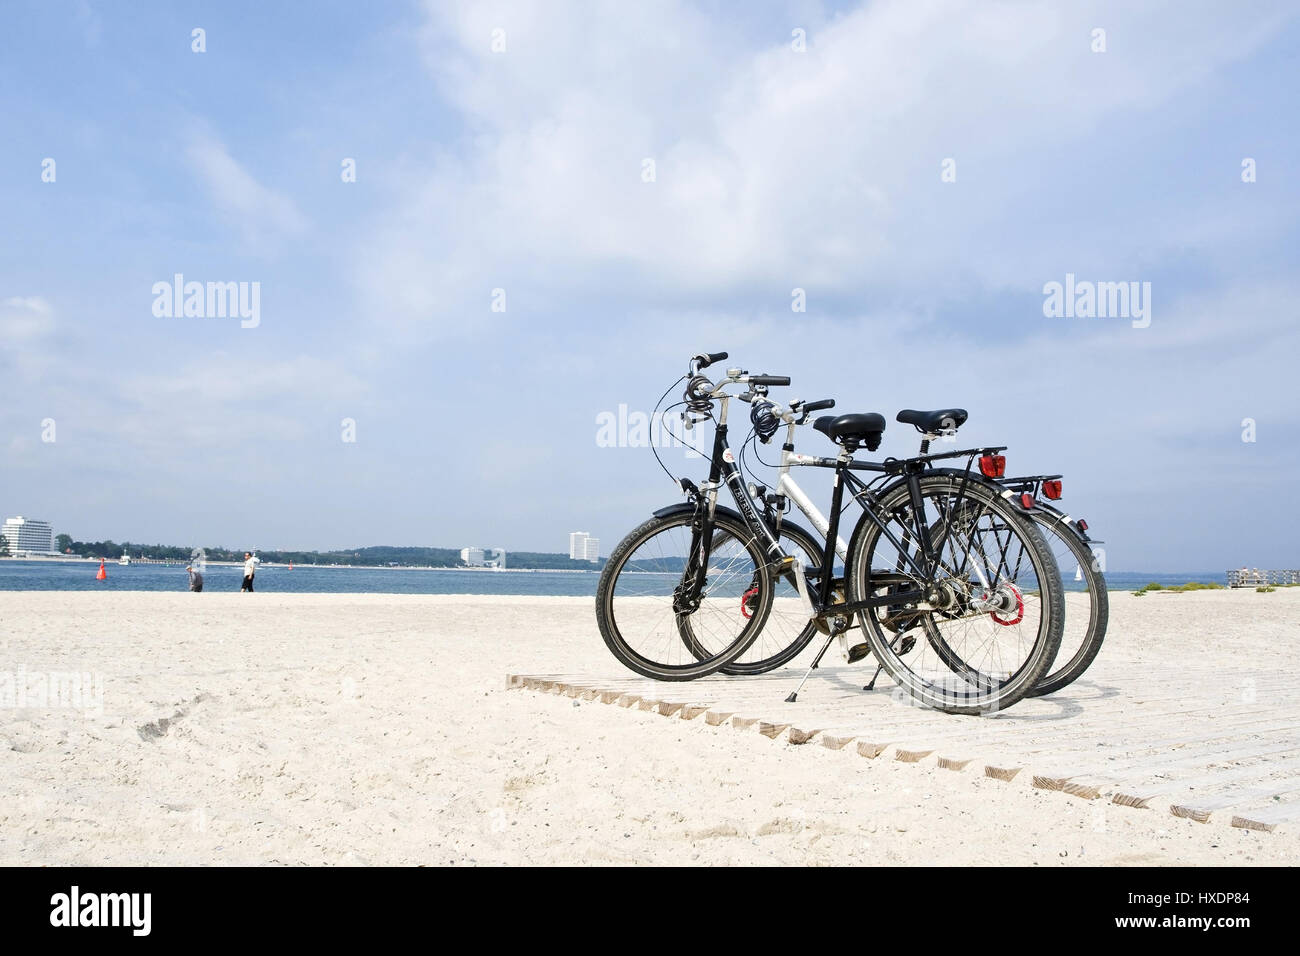 Two put down bicycles on the beach, Zwei abgestellte Fahrraeder am Strand Stock Photo